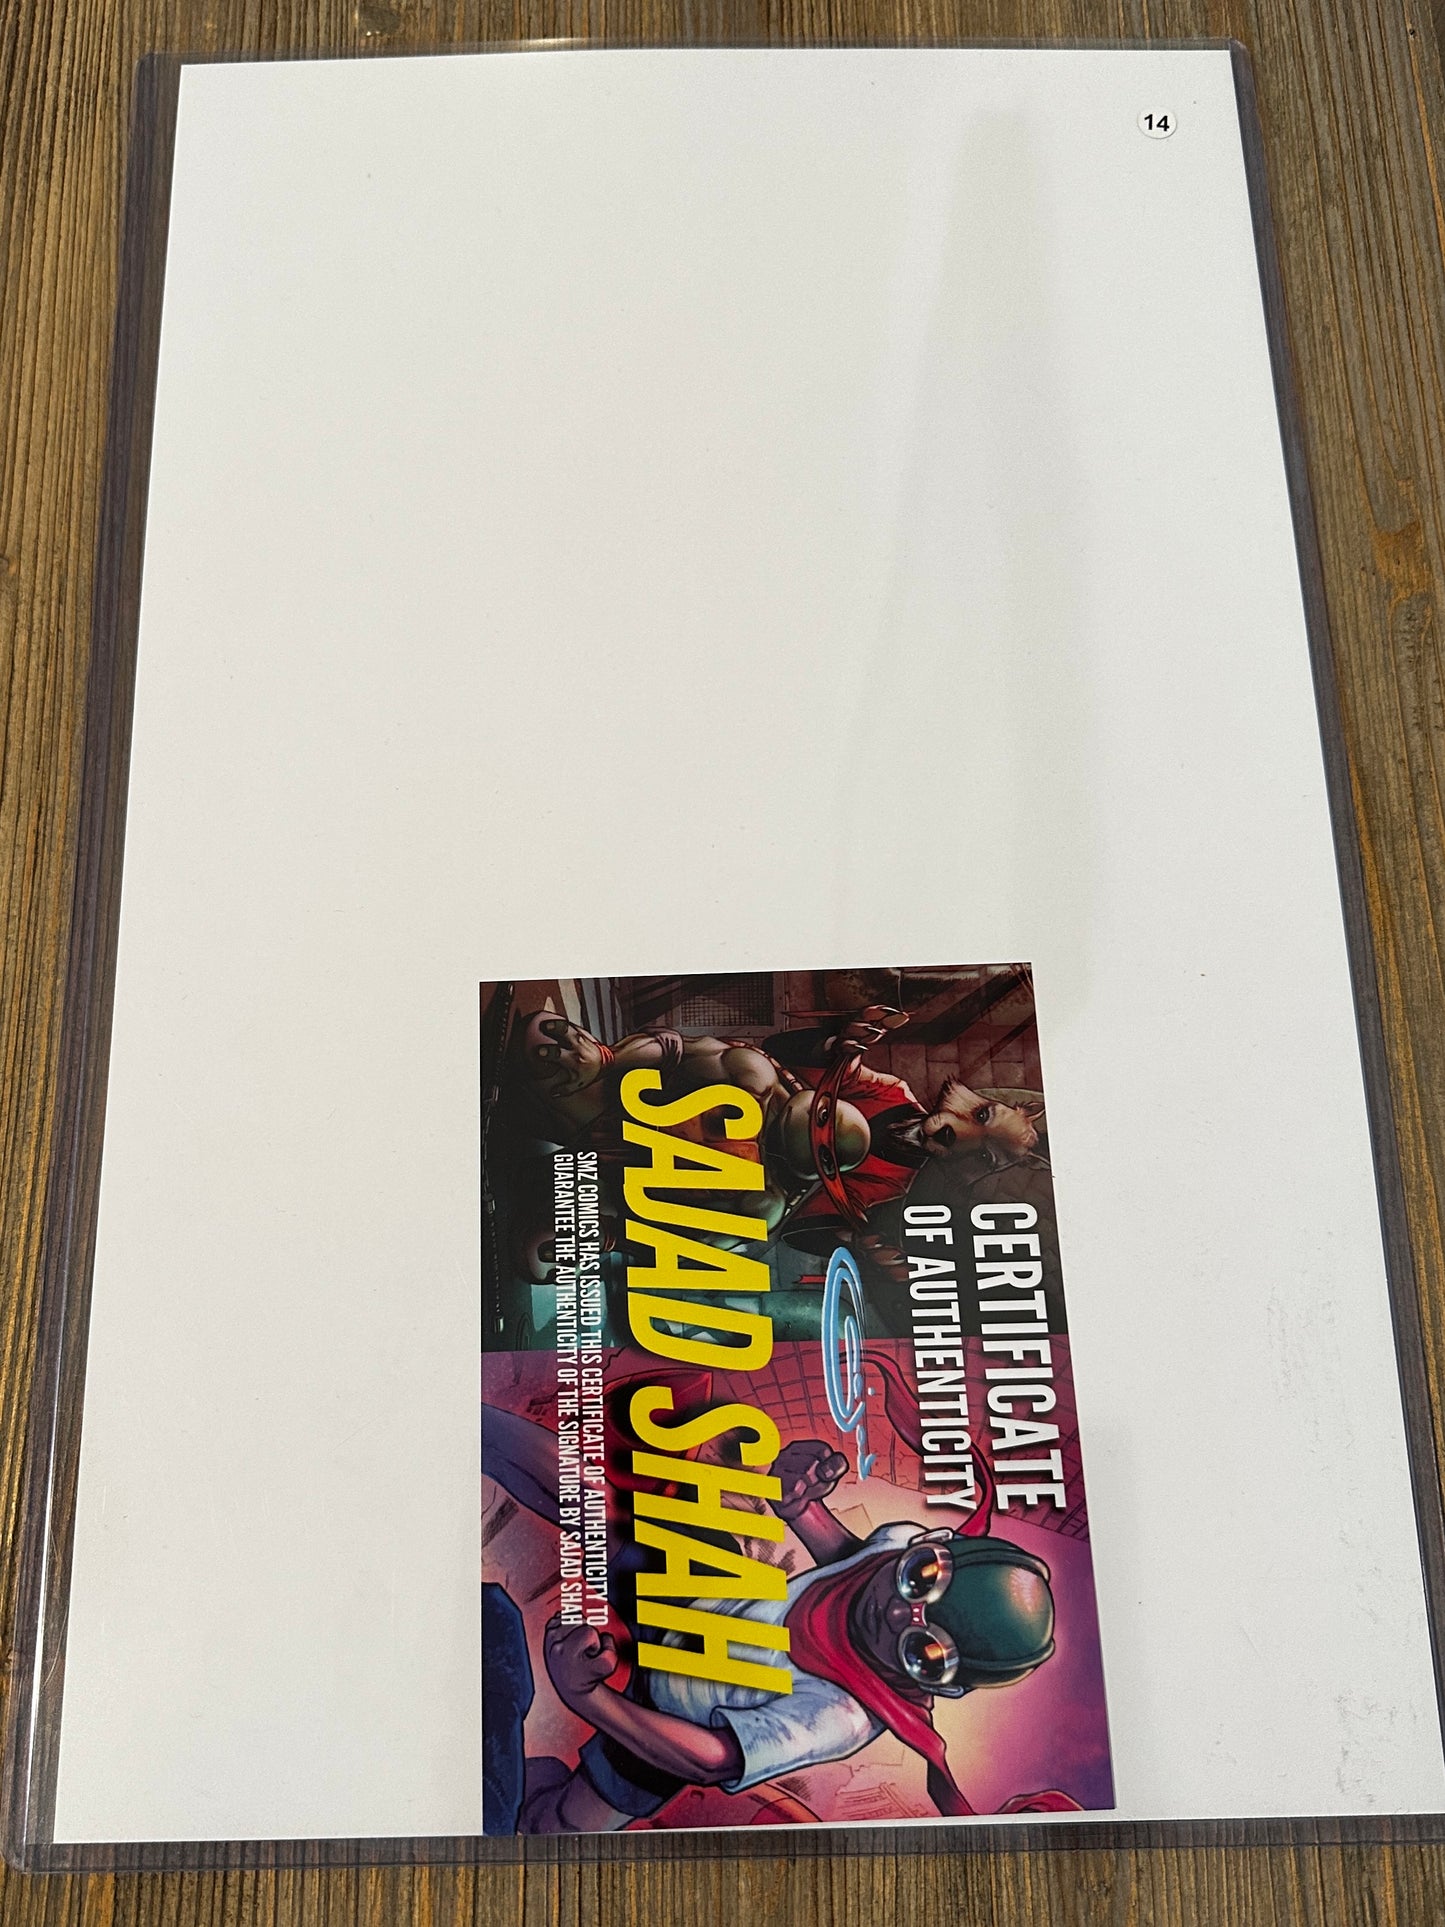 11x17 signed print Avengers tribute to Stan Lee